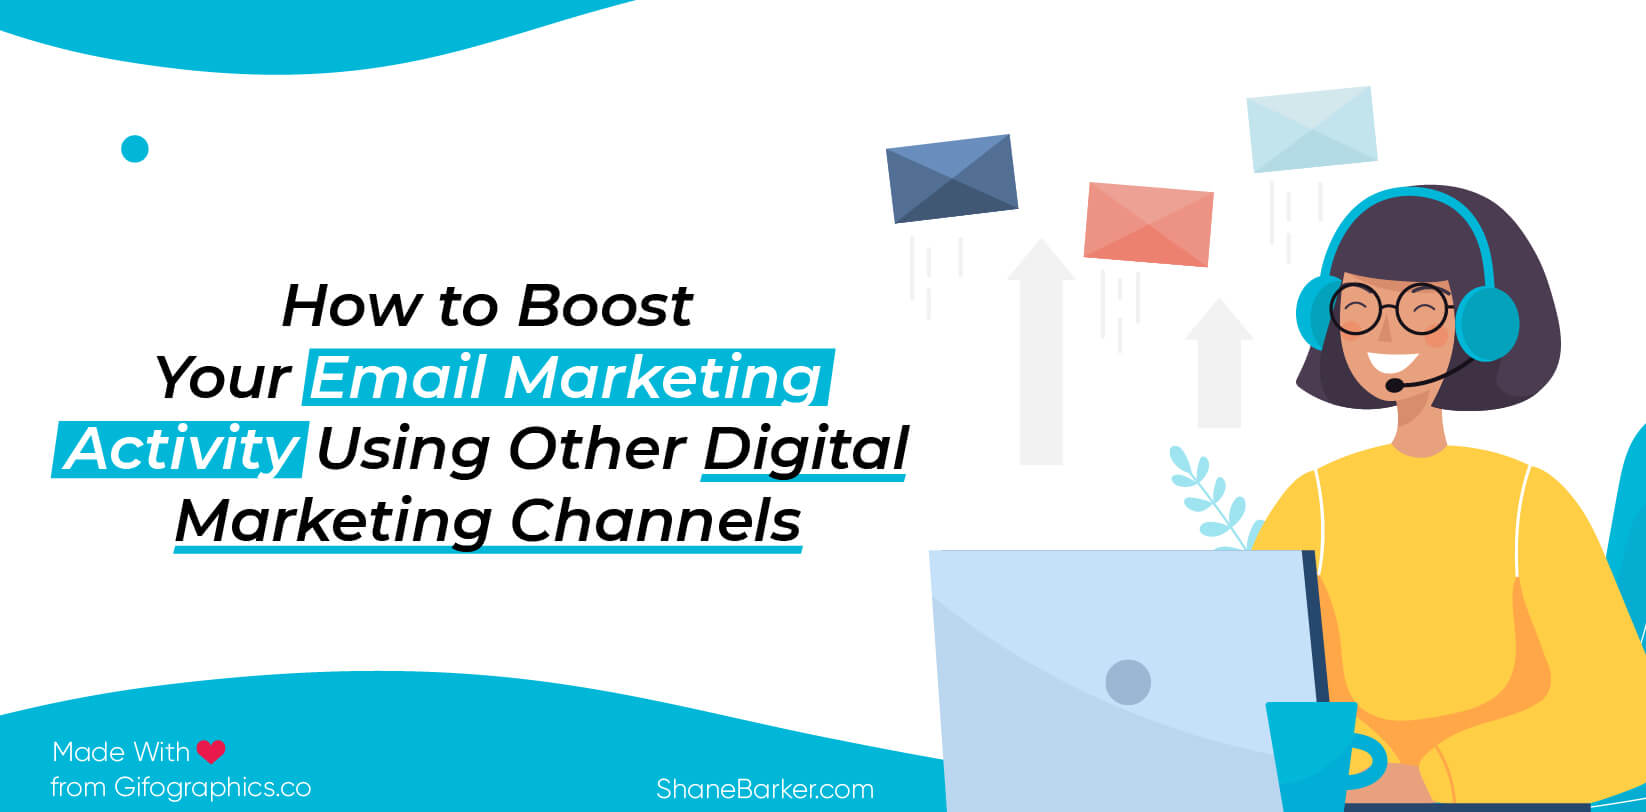 How to Boost Your Email Marketing Activity Using Other Digital Marketing Channels